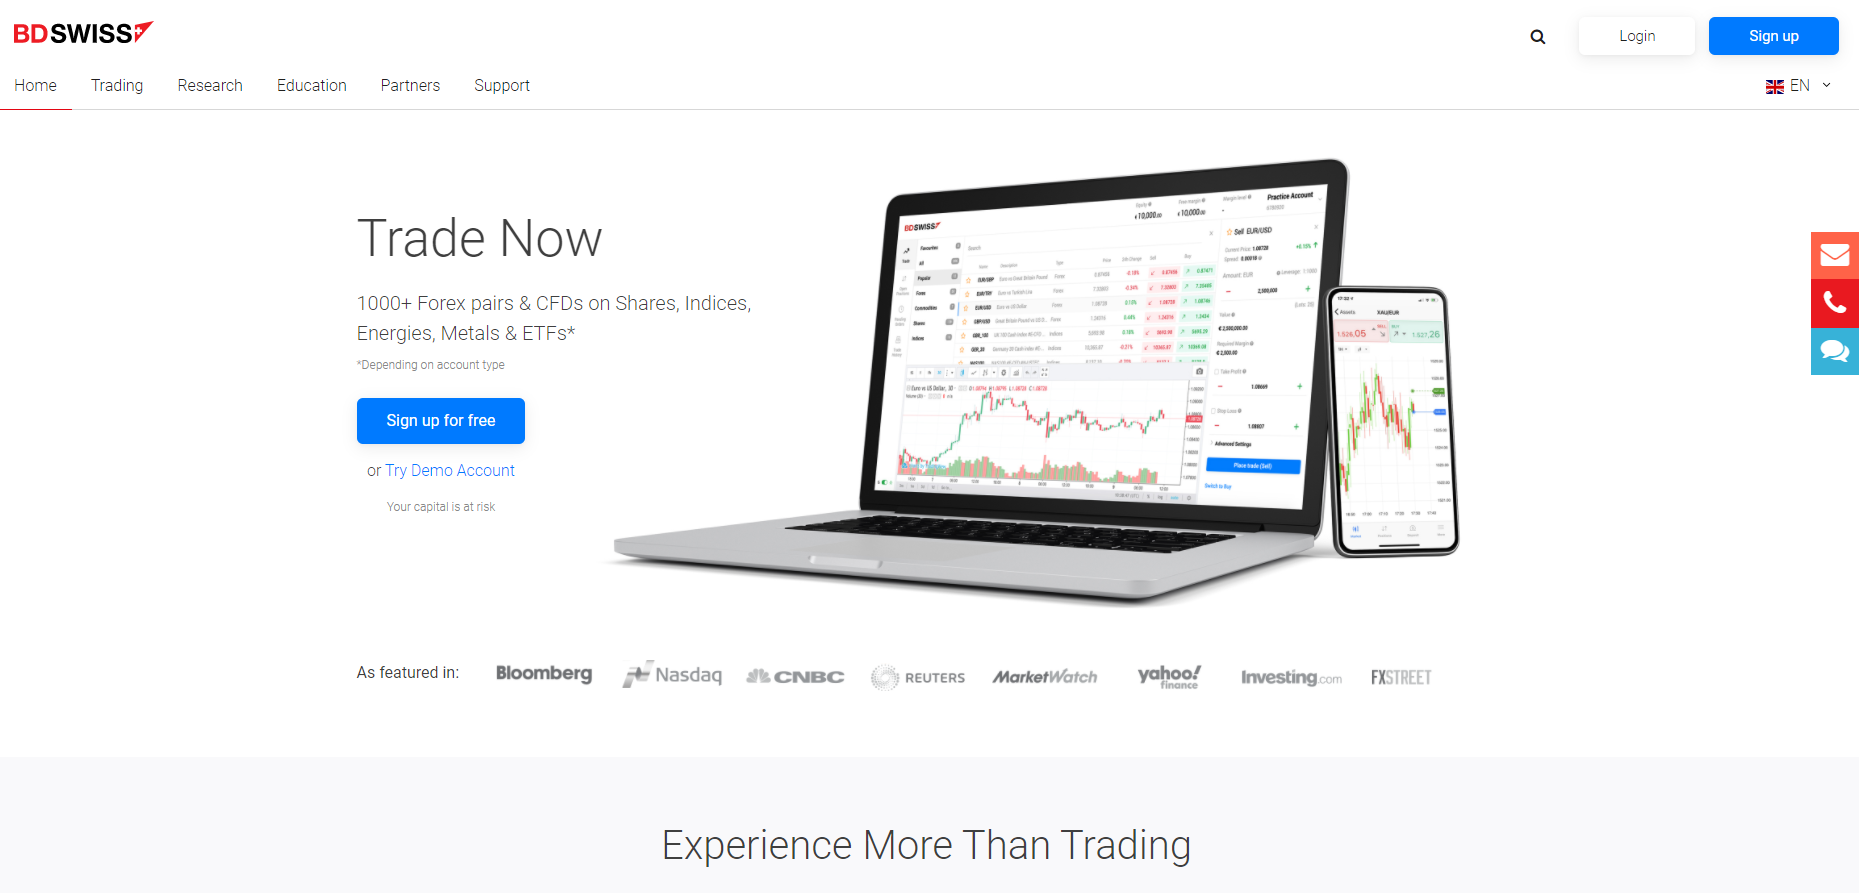 Official website of the forex broker BDSwiss in Europe